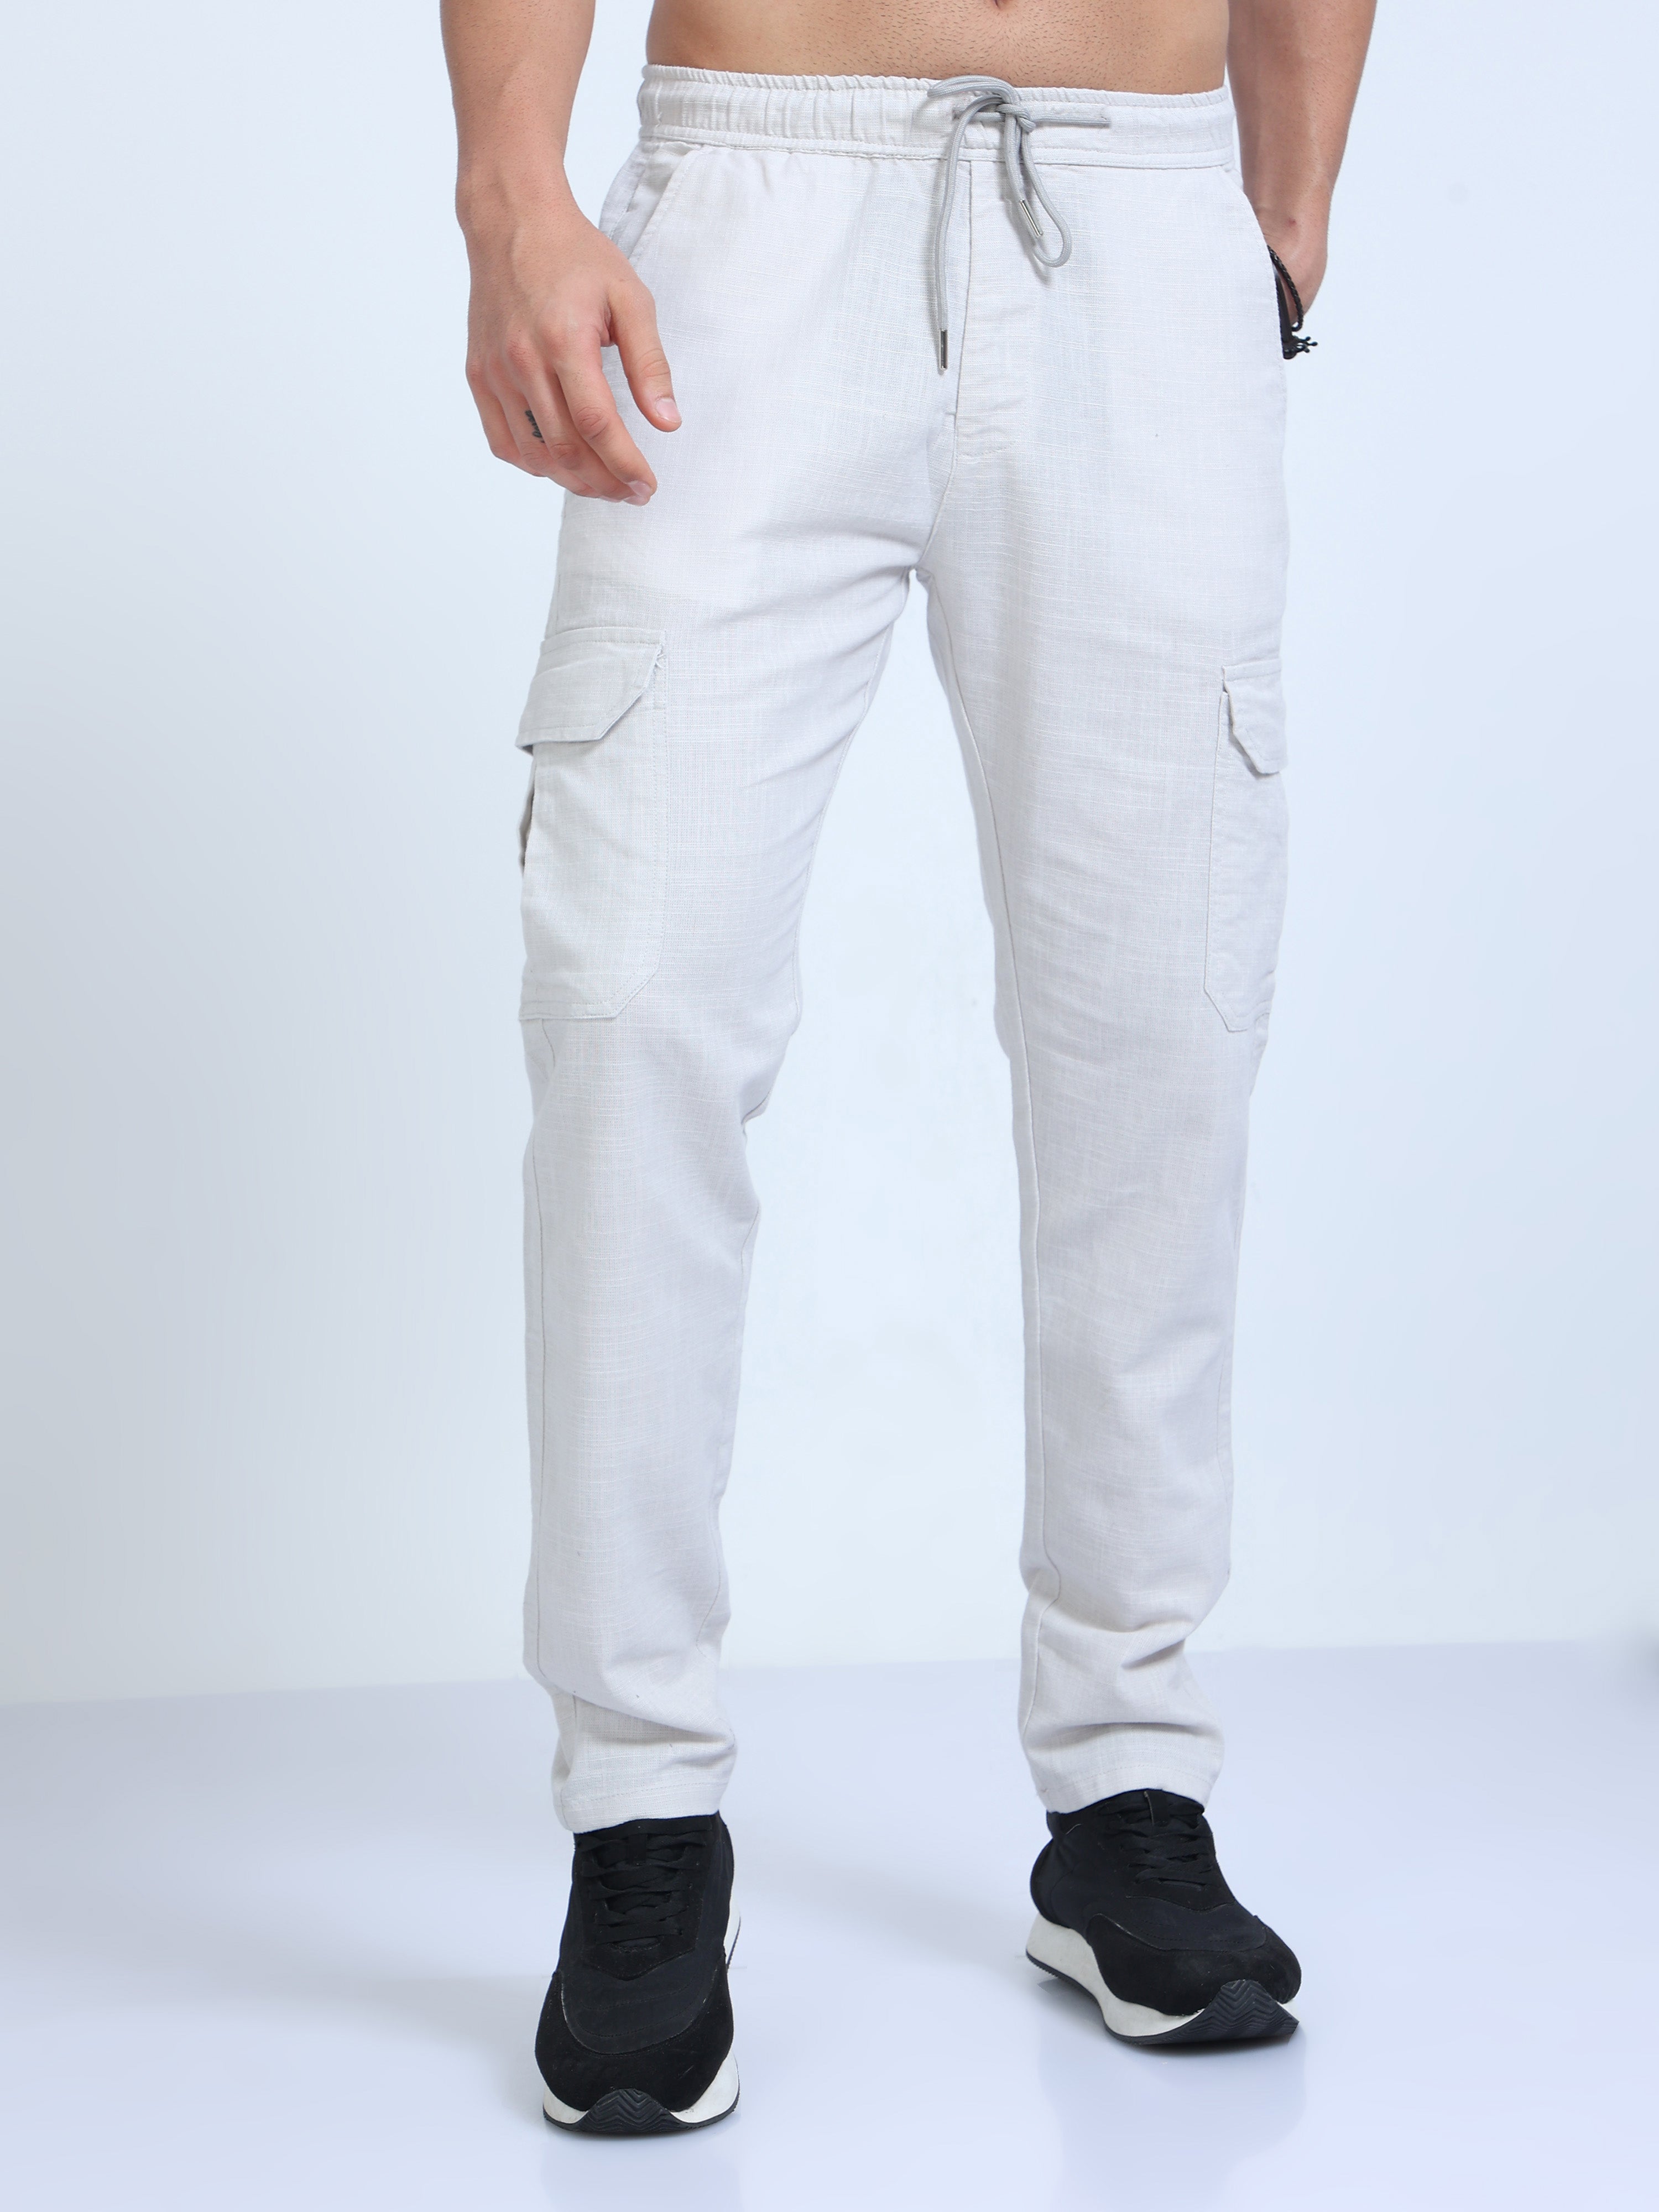 Ankle pants men, Men's Fashion, Bottoms, Chinos on Carousell